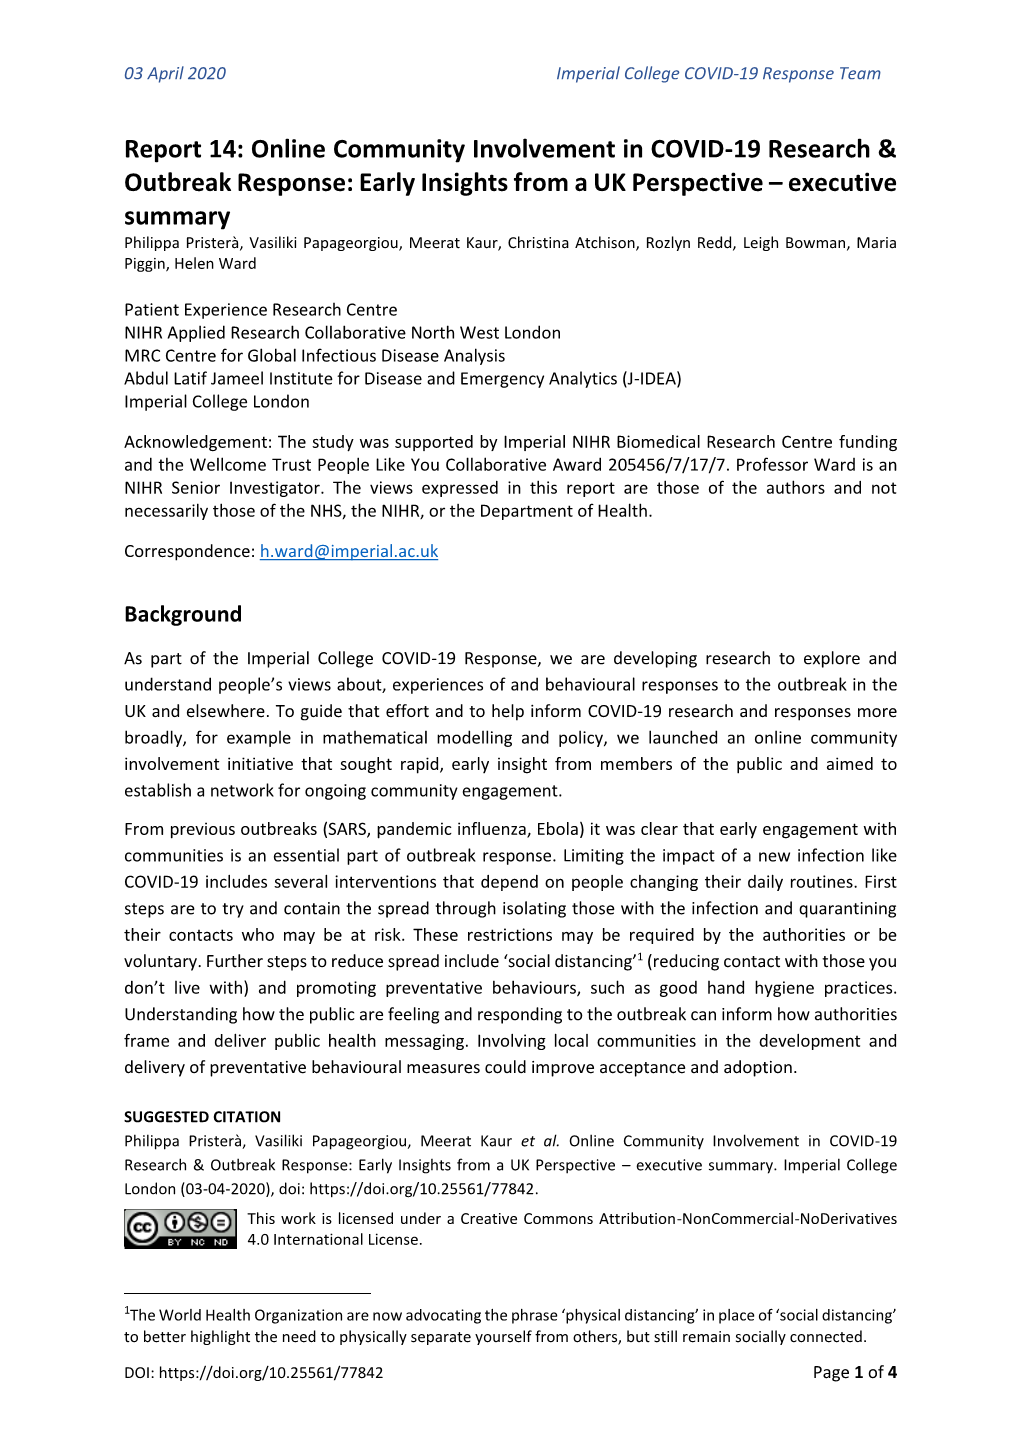 Report 14: Online Community Involvement in COVID-19 Research & Outbreak Response